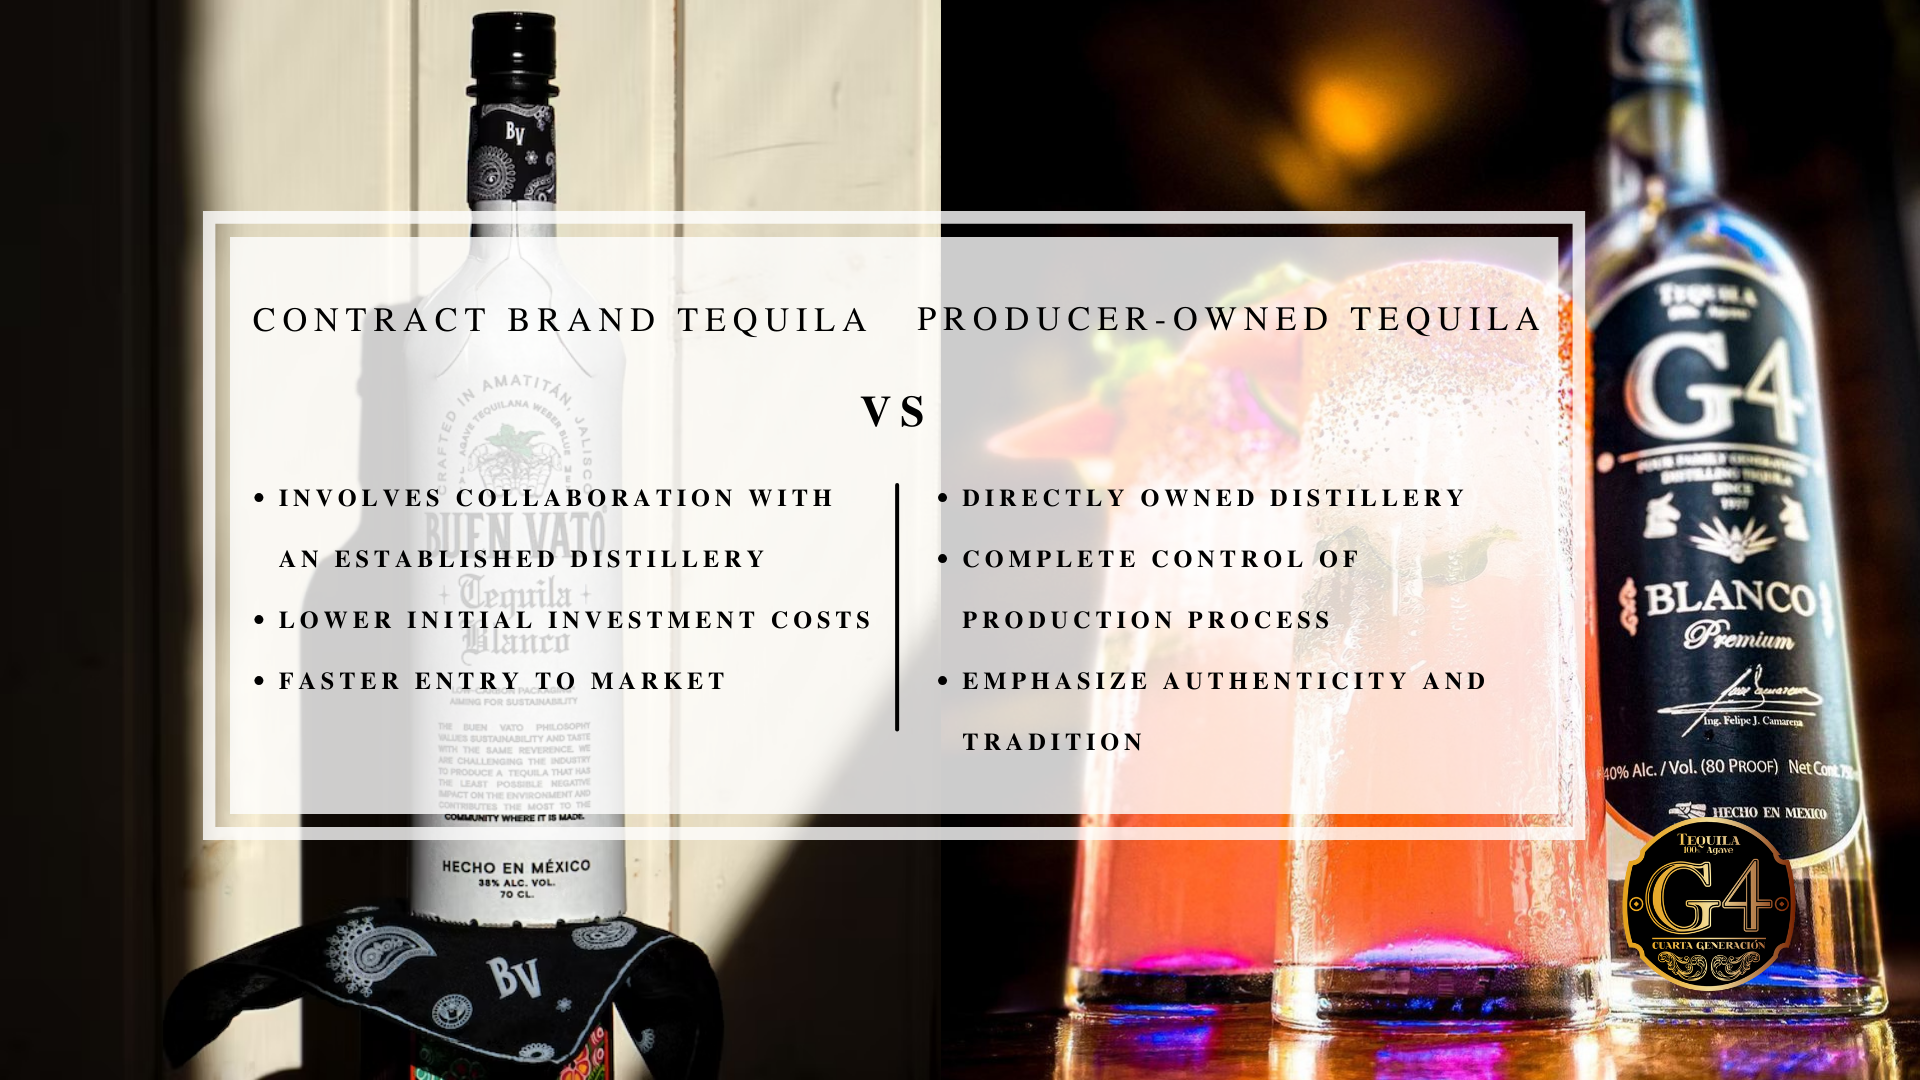 Infographic image of contract brand tequila vs producer-owned tequila